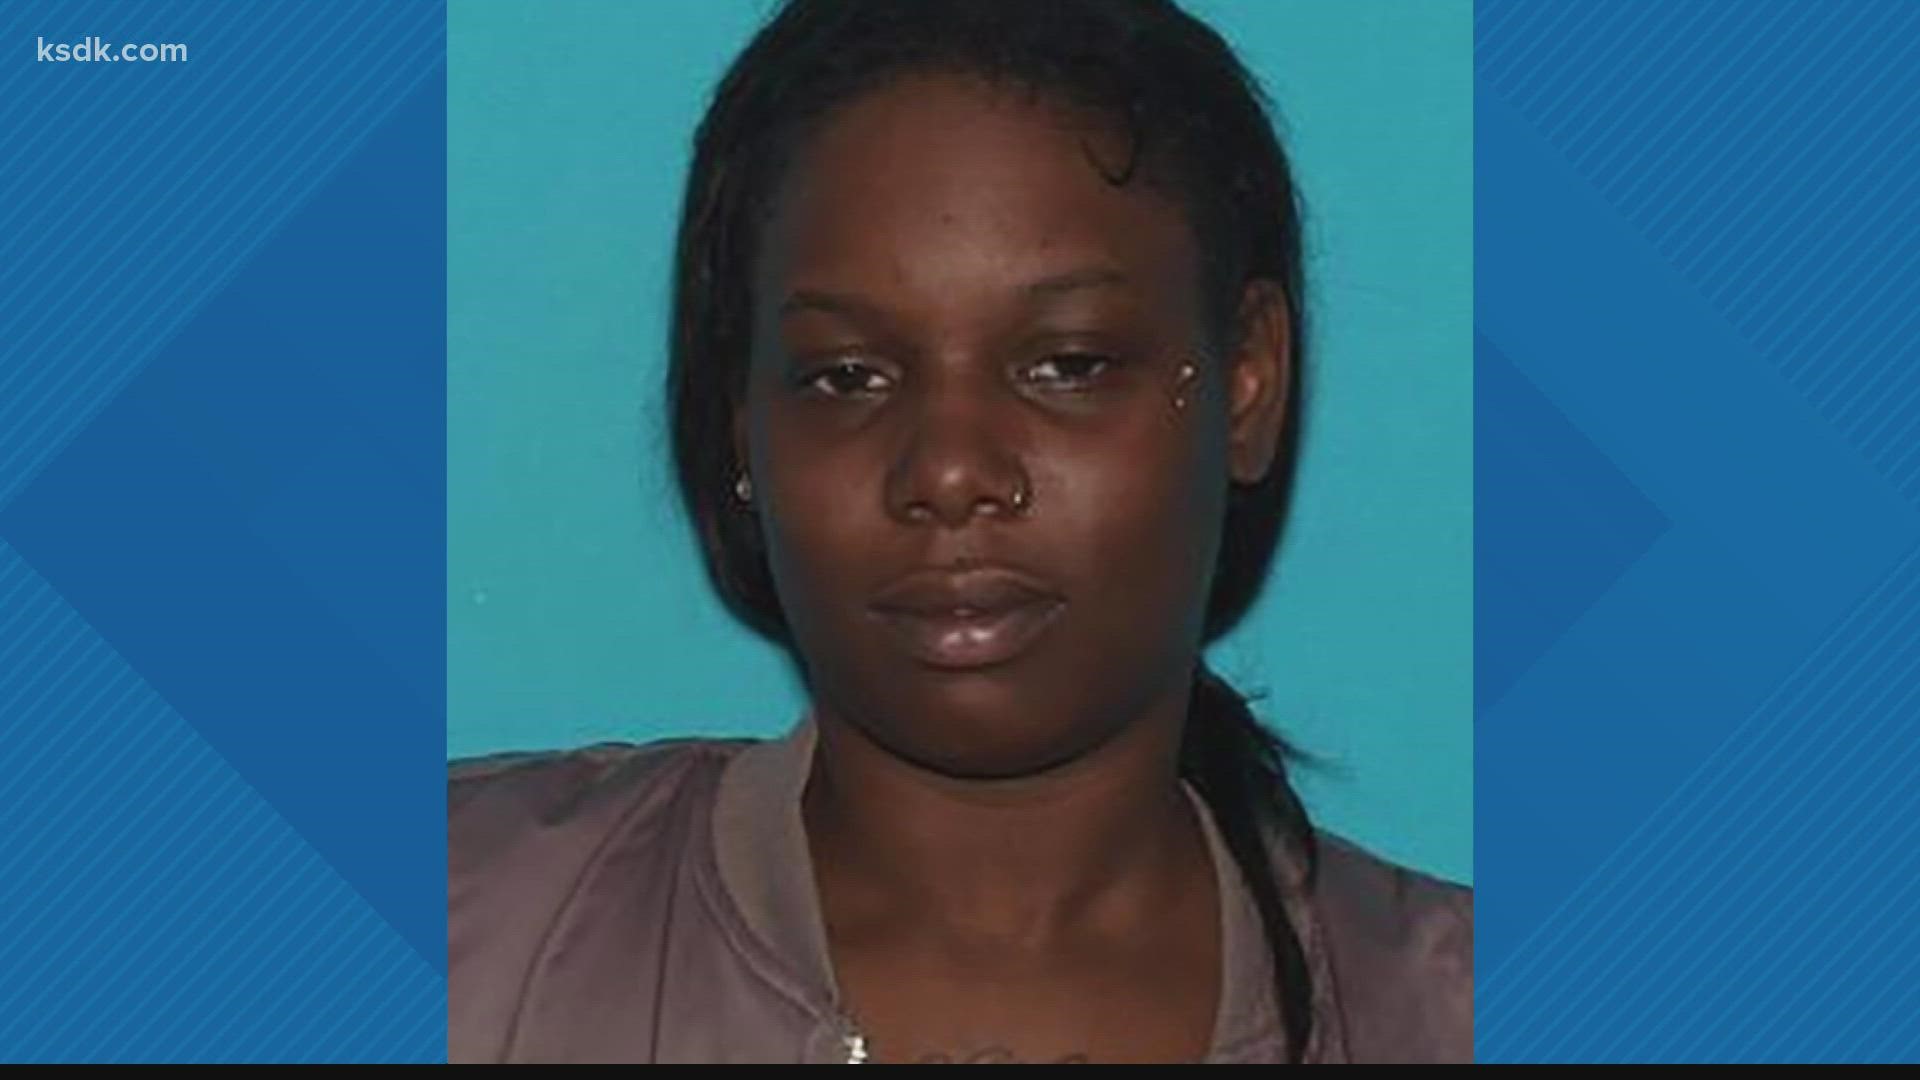 Dasia Allen went missing March 31 after she left home to go grocery shopping. Police are investigating her death as a homicide.